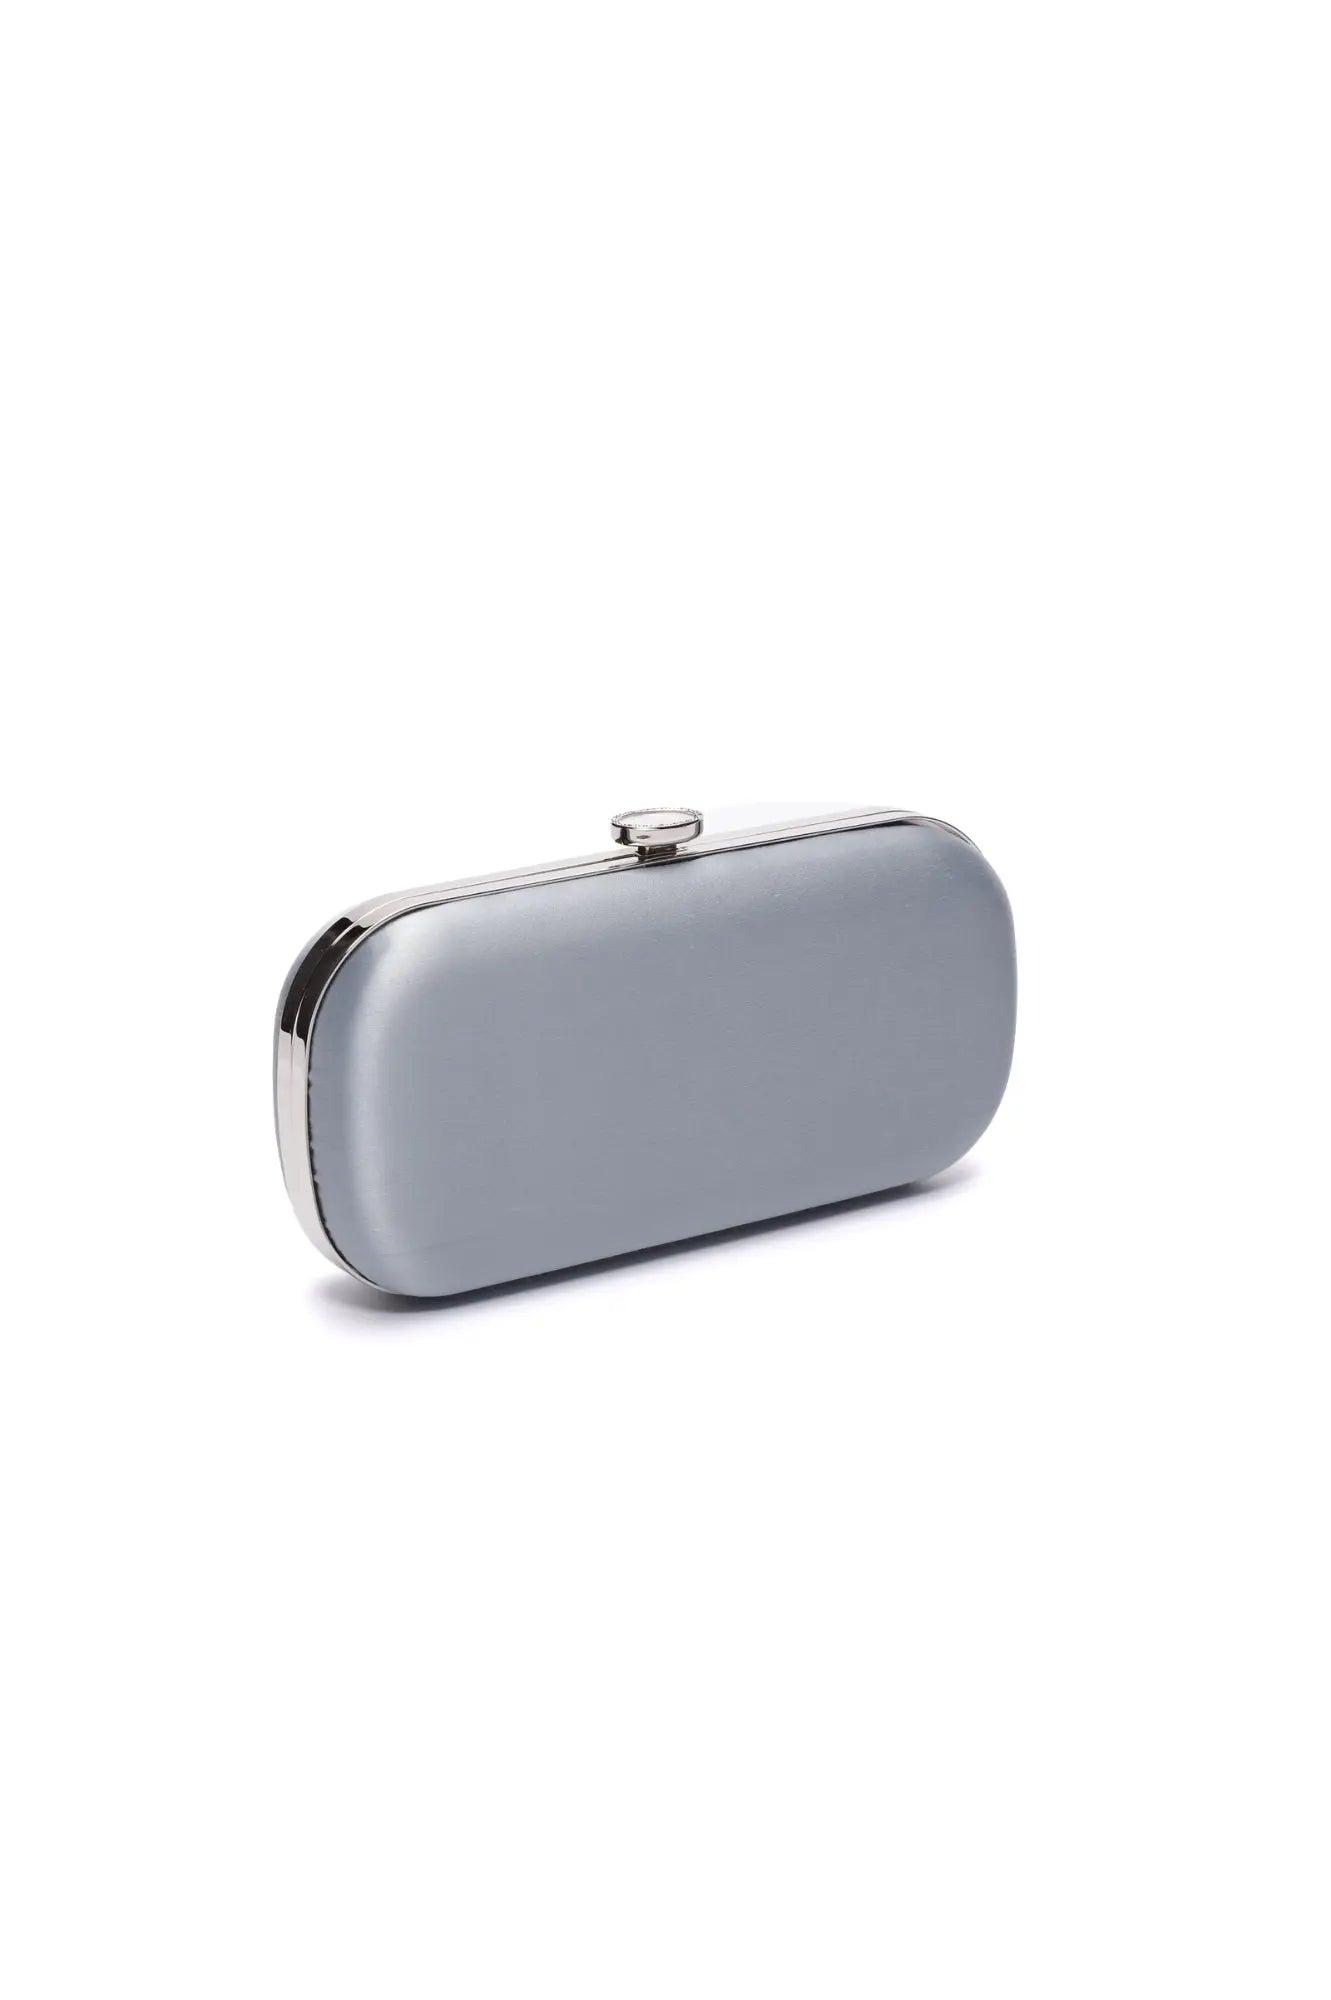 A Bella Clutch Steel Blue Satin Petite from The Bella Rosa Collection on a white background.